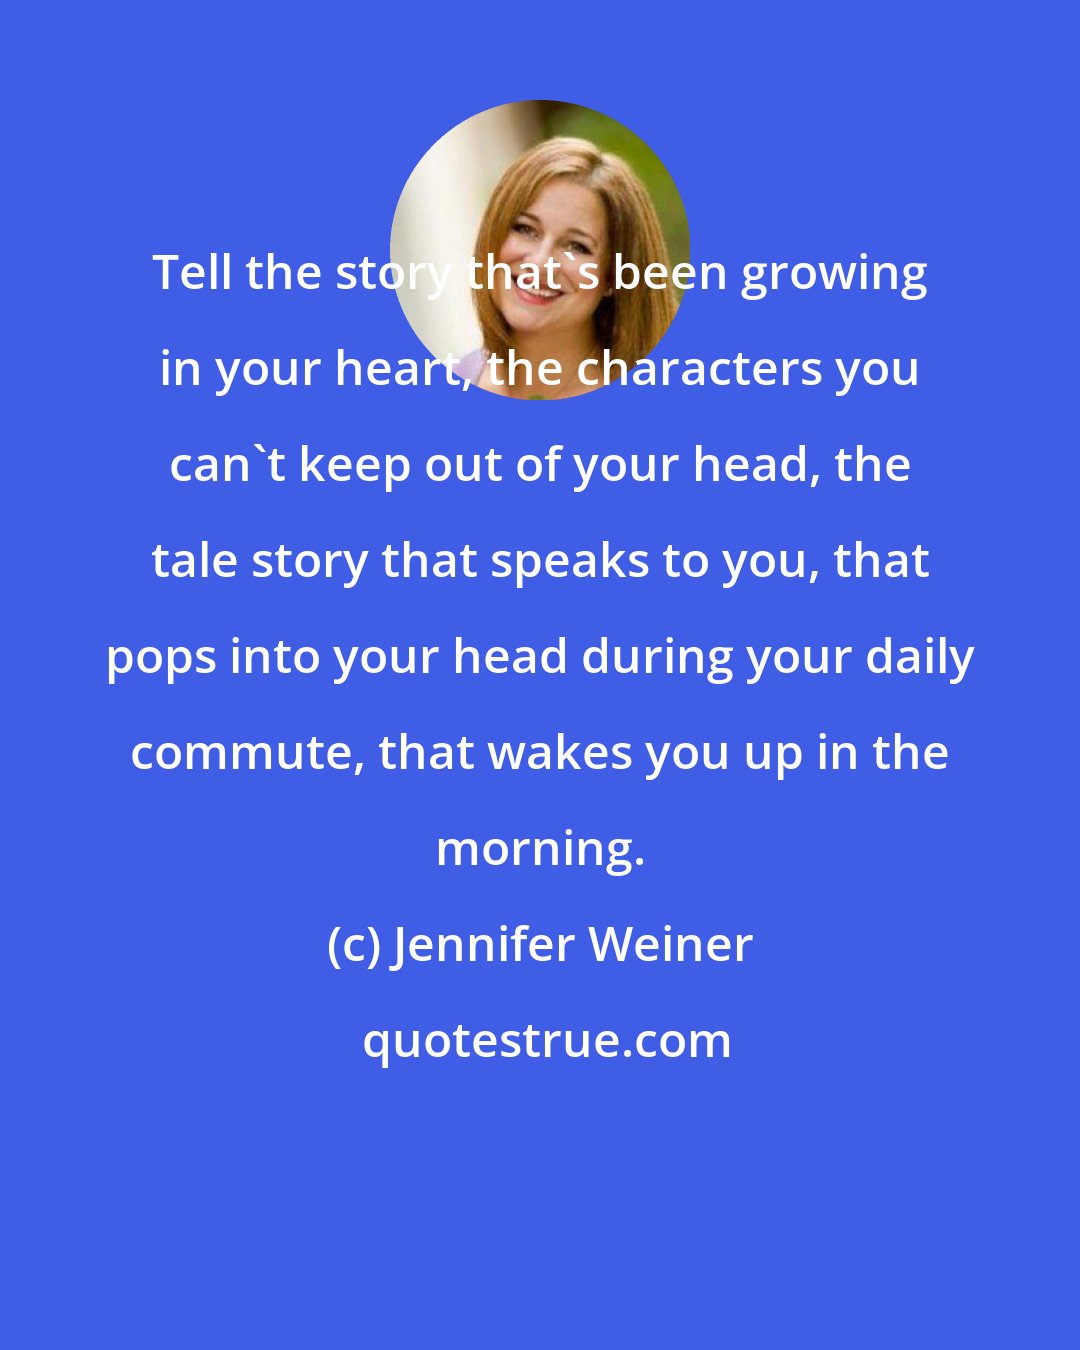 Jennifer Weiner: Tell the story that's been growing in your heart, the characters you can't keep out of your head, the tale story that speaks to you, that pops into your head during your daily commute, that wakes you up in the morning.